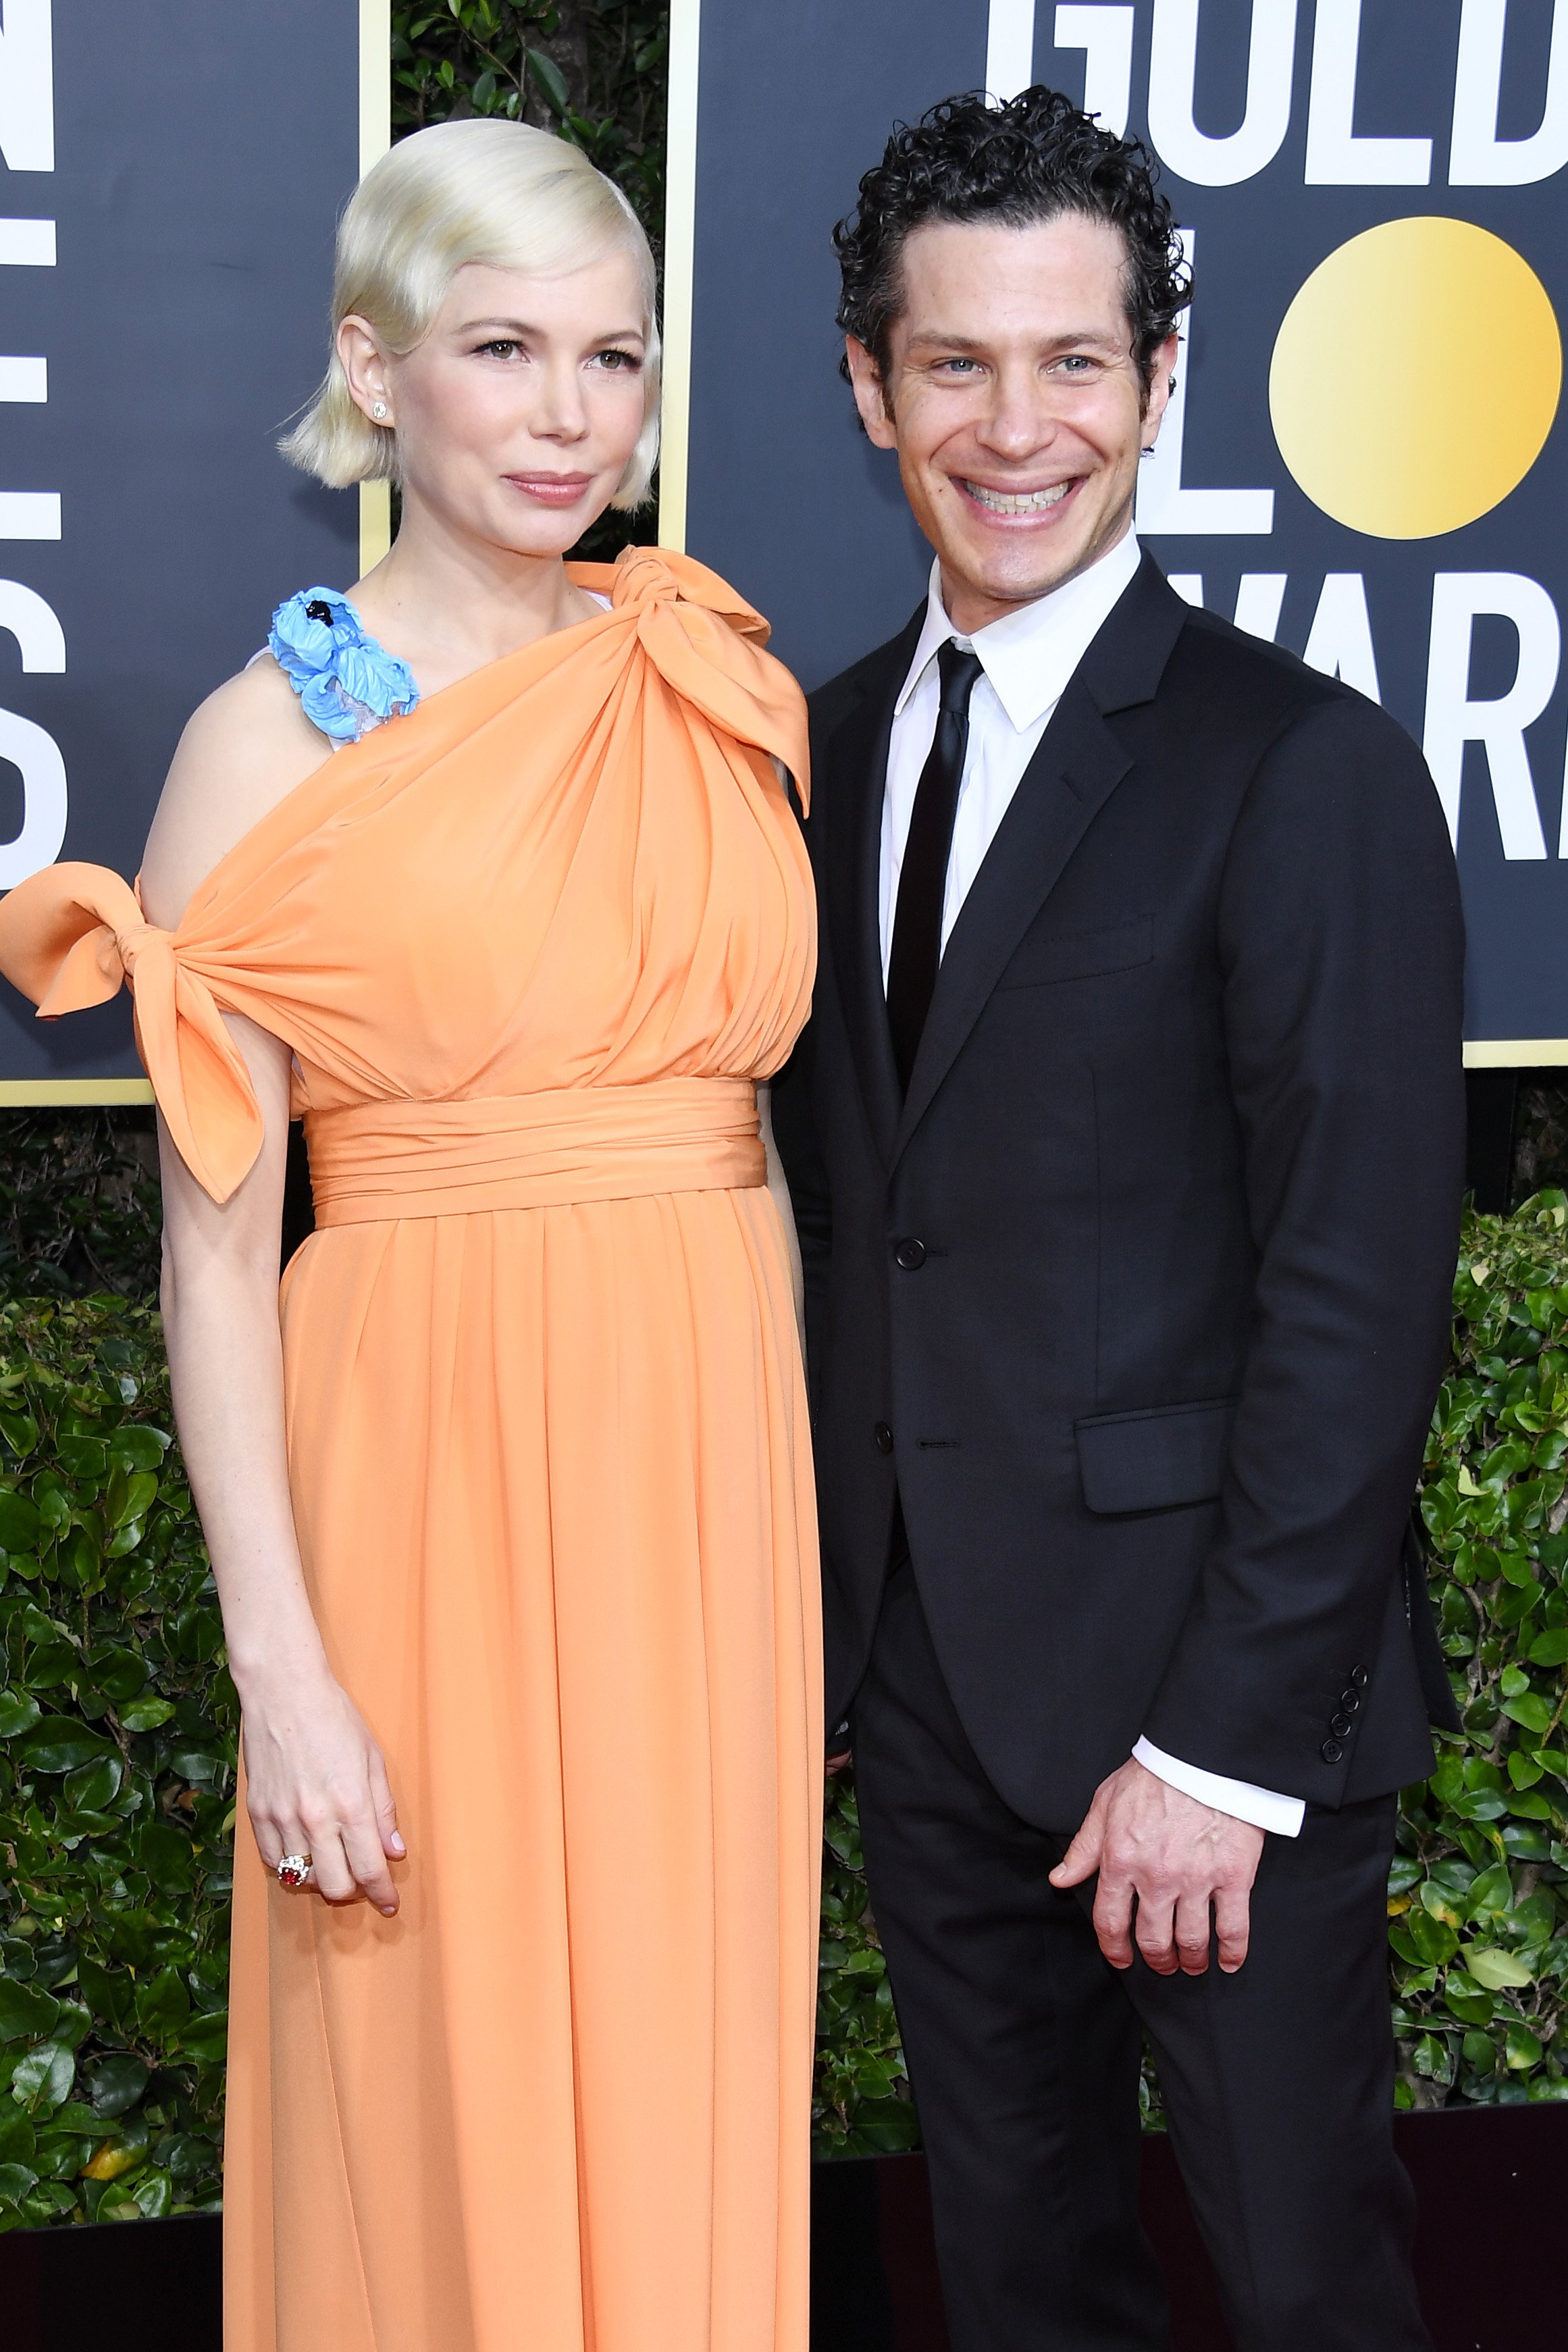 Michelle Williams and Thomas Kail at the 77th Annual Golden Globe Awards at The Beverly Hilton Hotel on January 05, 2020 in Beverly Hills, California. | Source: Getty Images